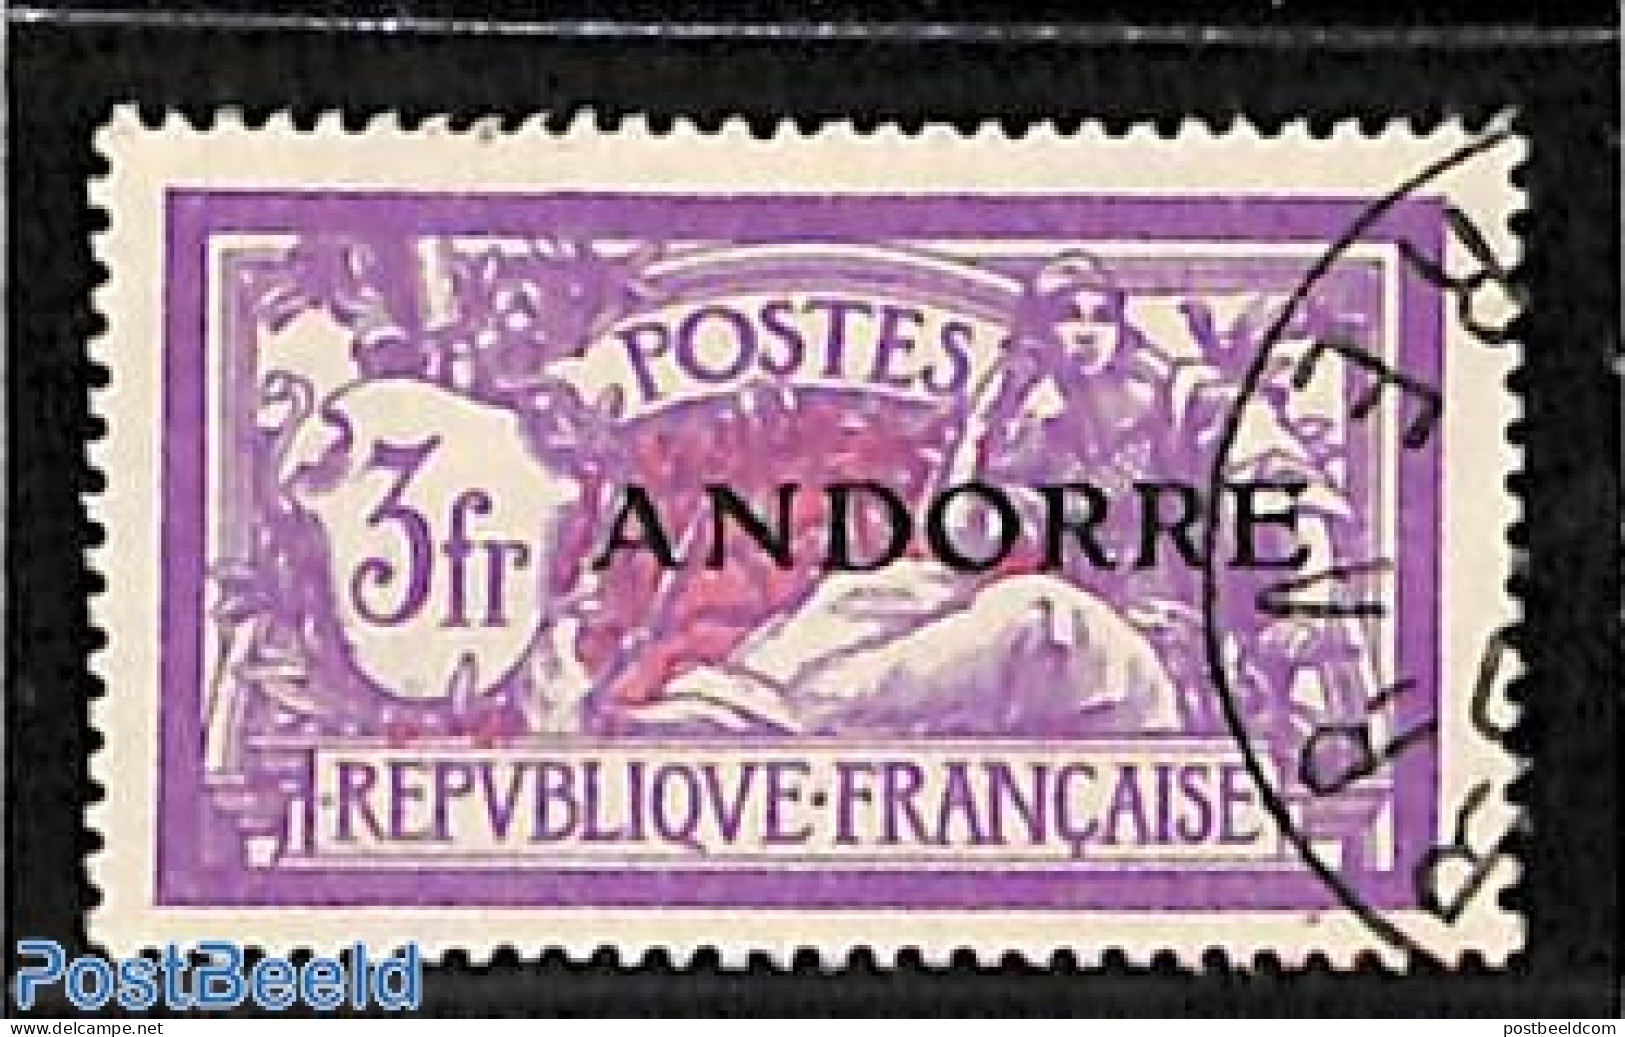 Andorra, French Post 1931 3FR, Used, Used Stamps - Oblitérés